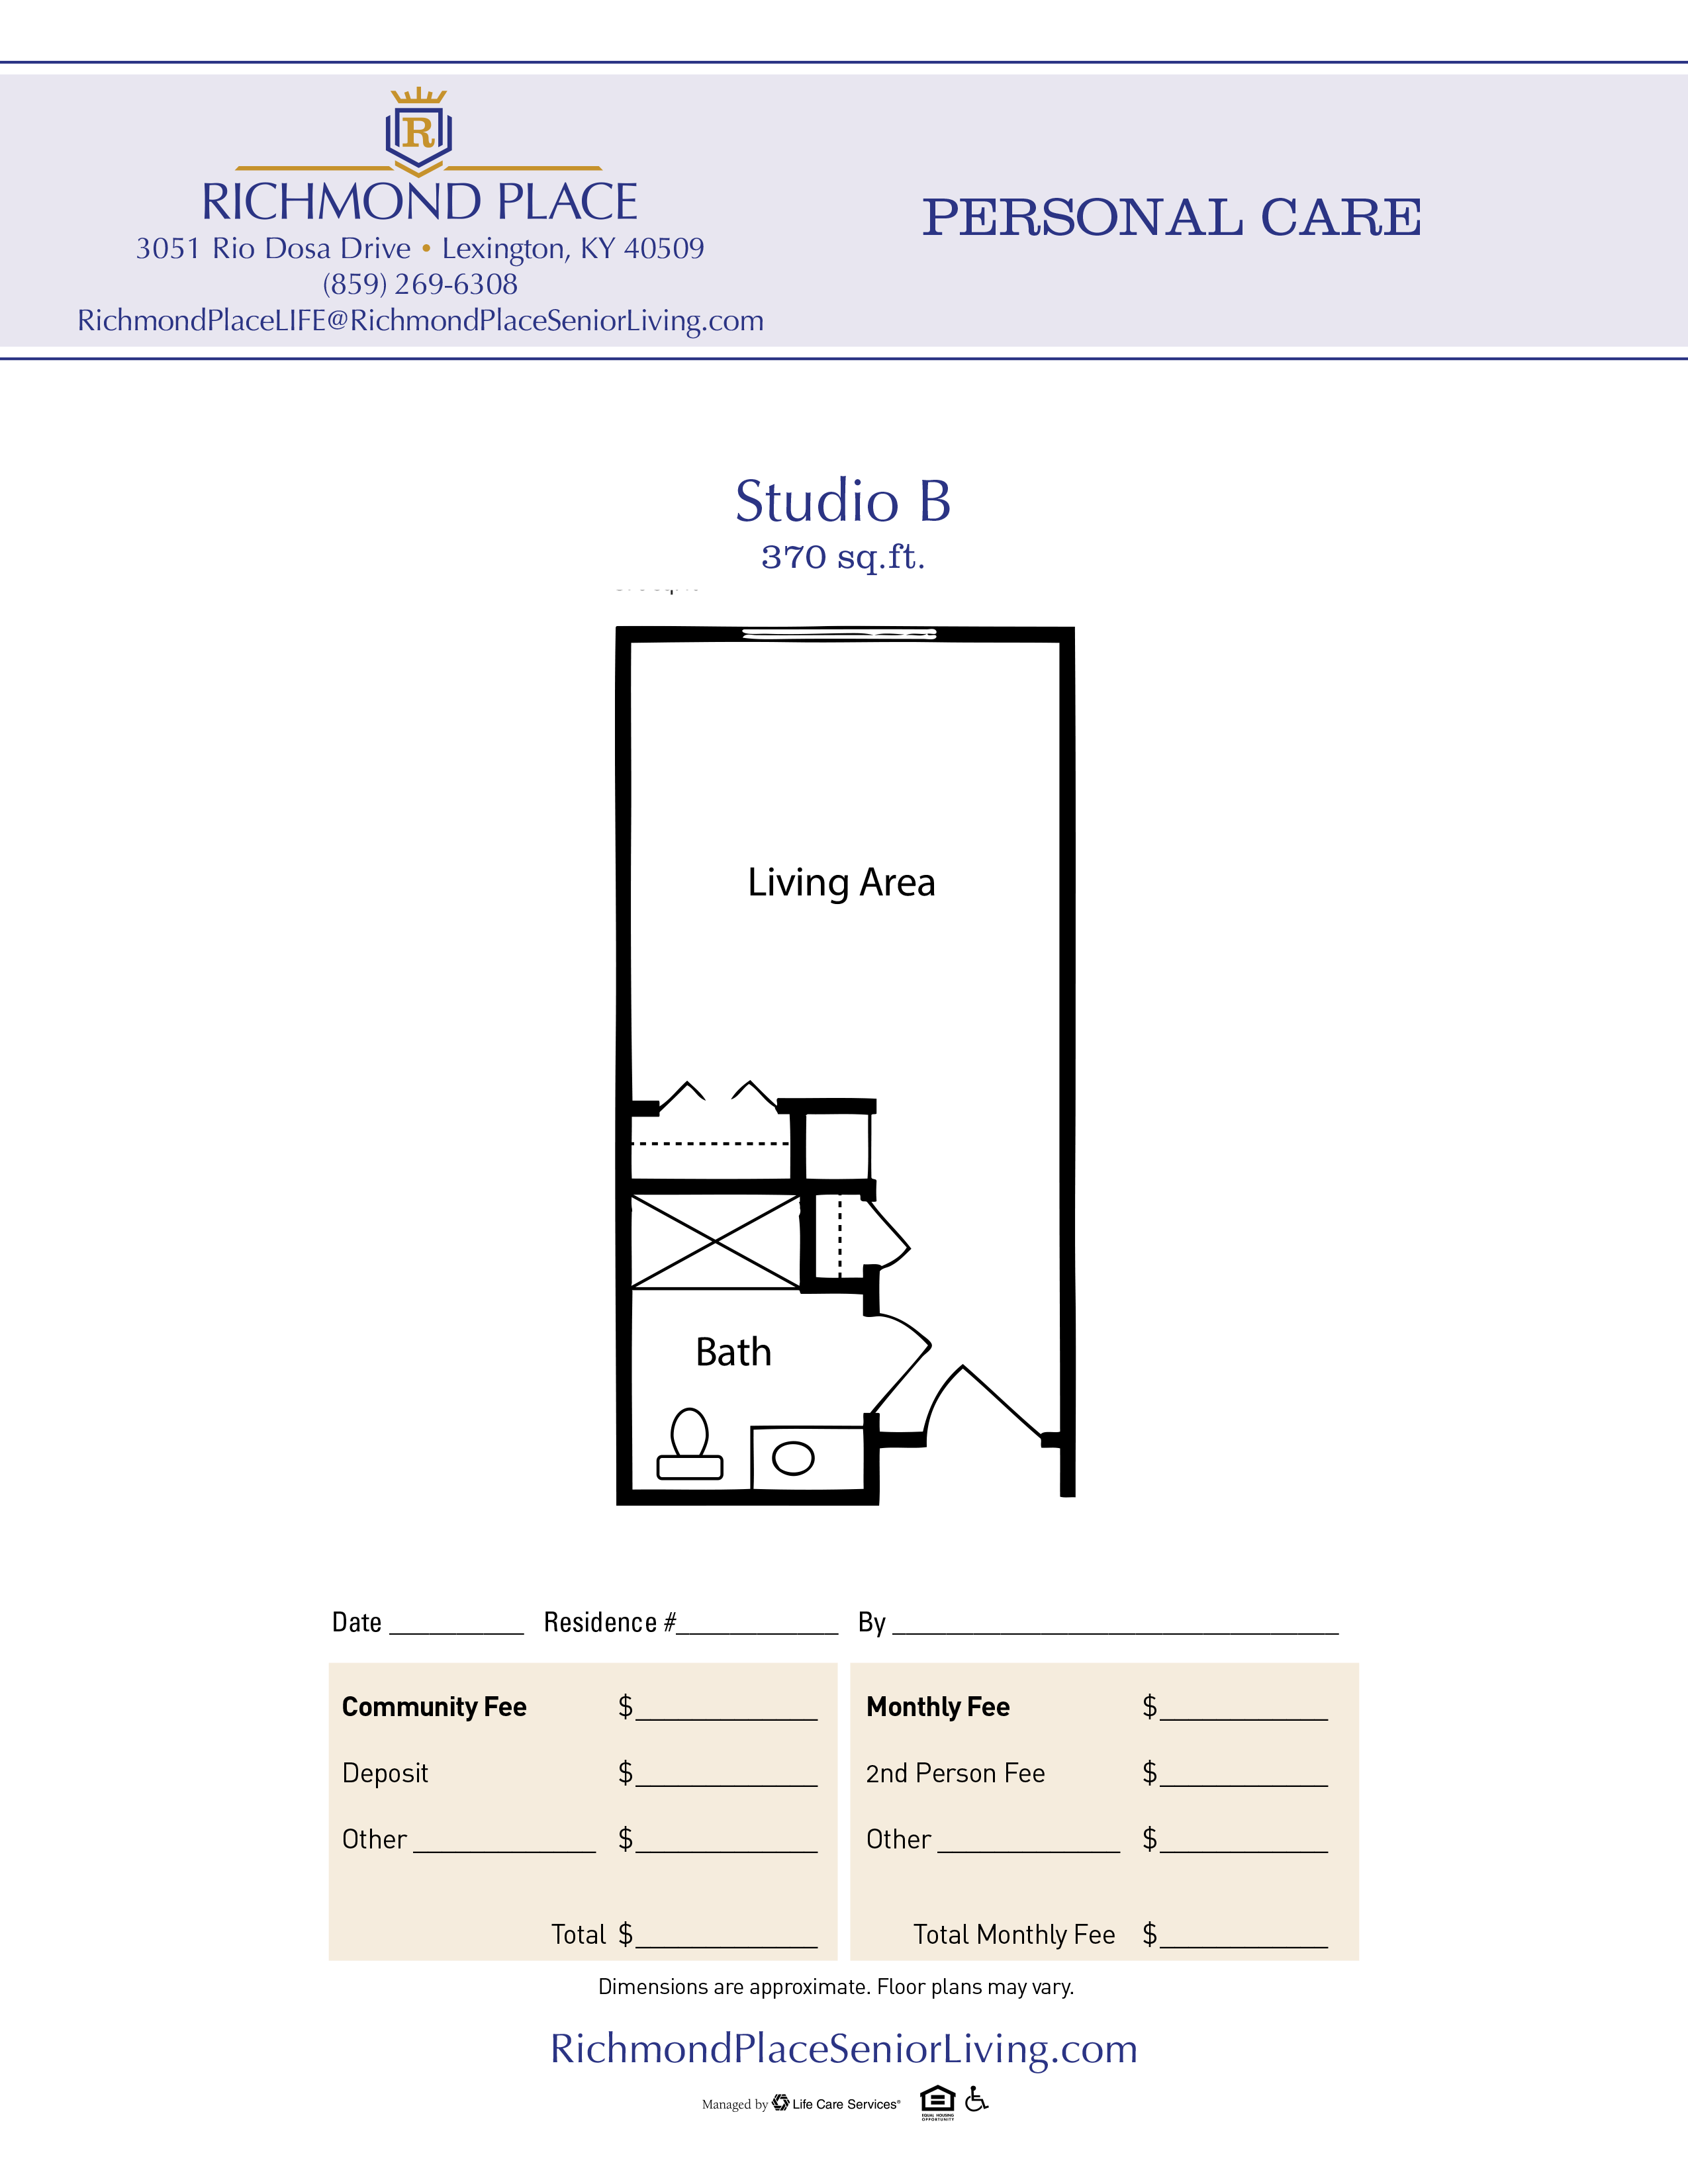 Floor plan for Studio B unit at Richmond Place Senior Living, 370 sq. ft. with bath and living area.